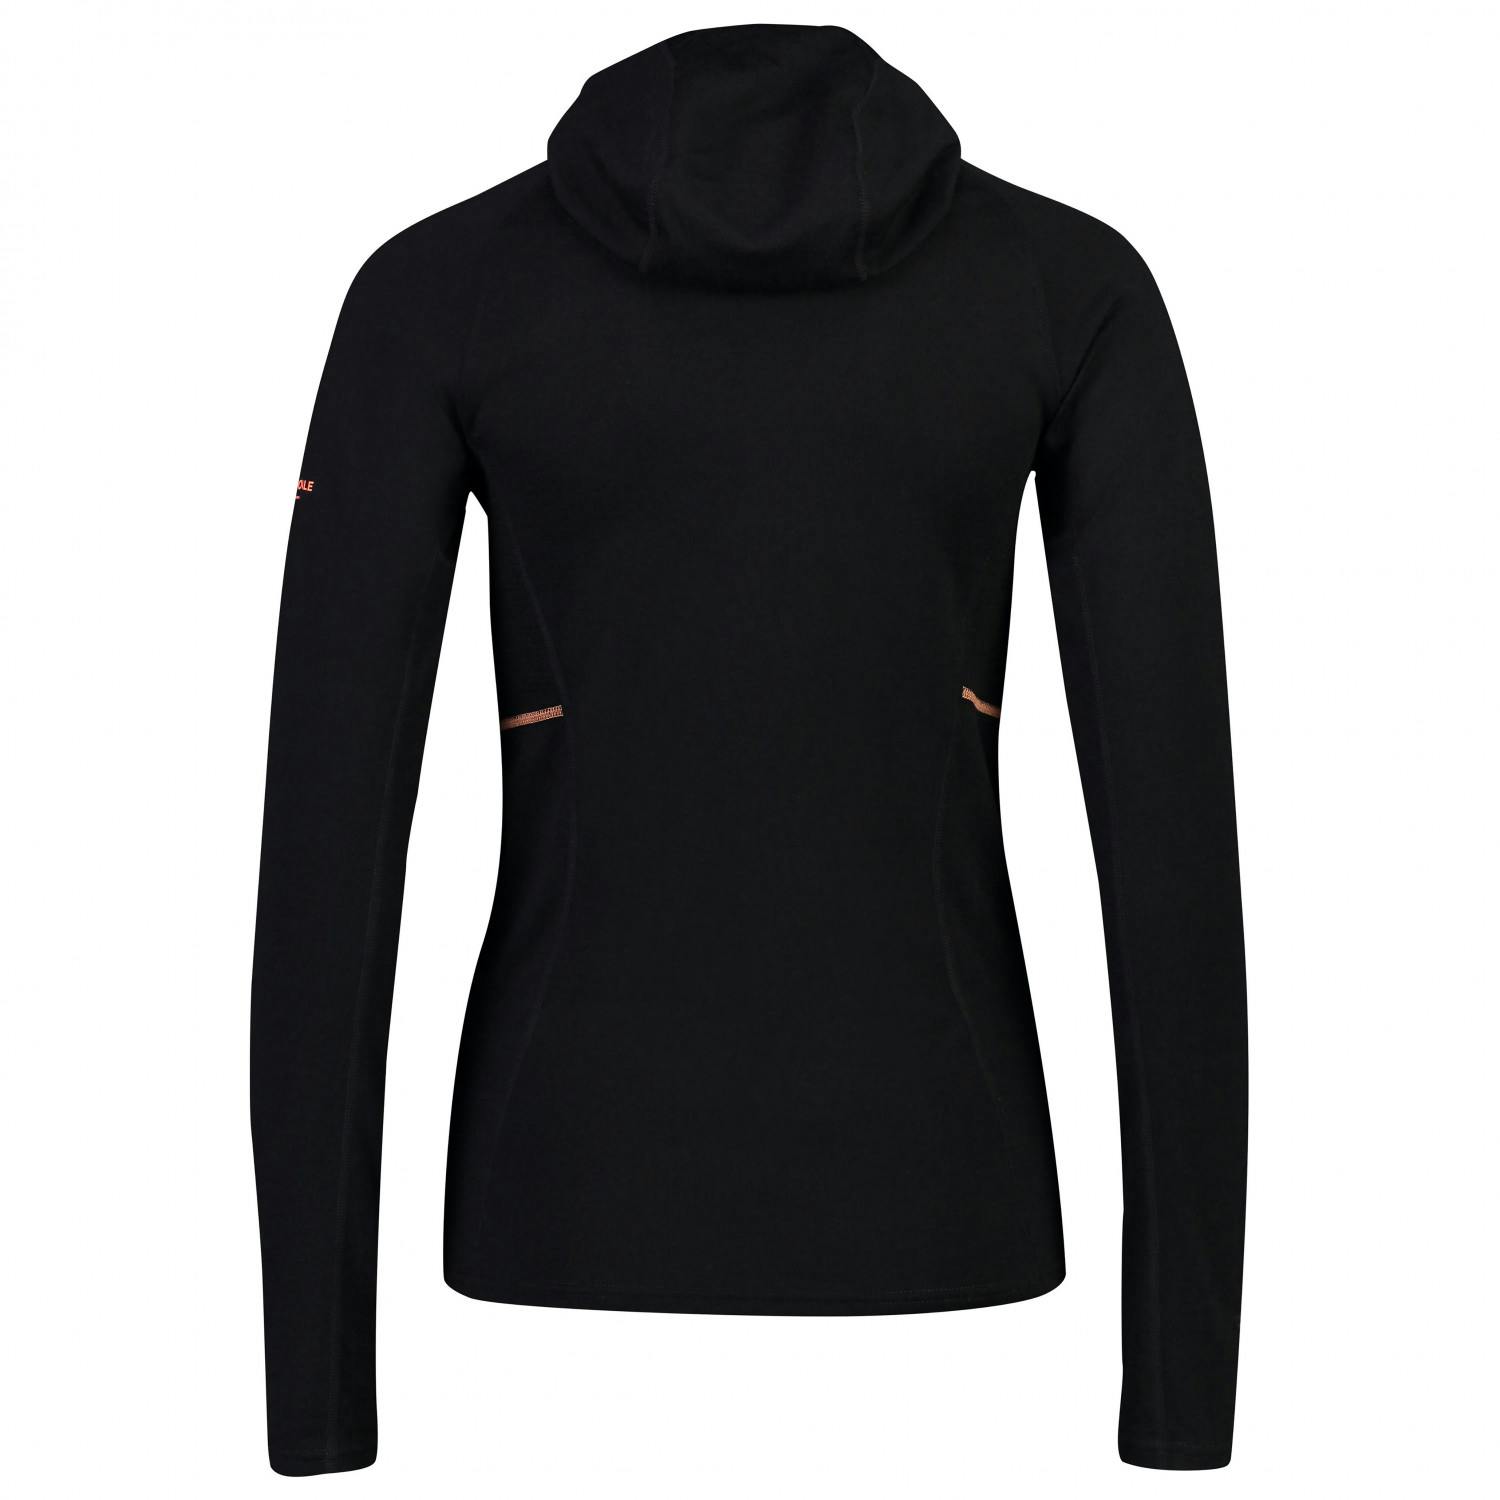 Mons Royale Women's Olympus 3.0 Hooded Base Layer